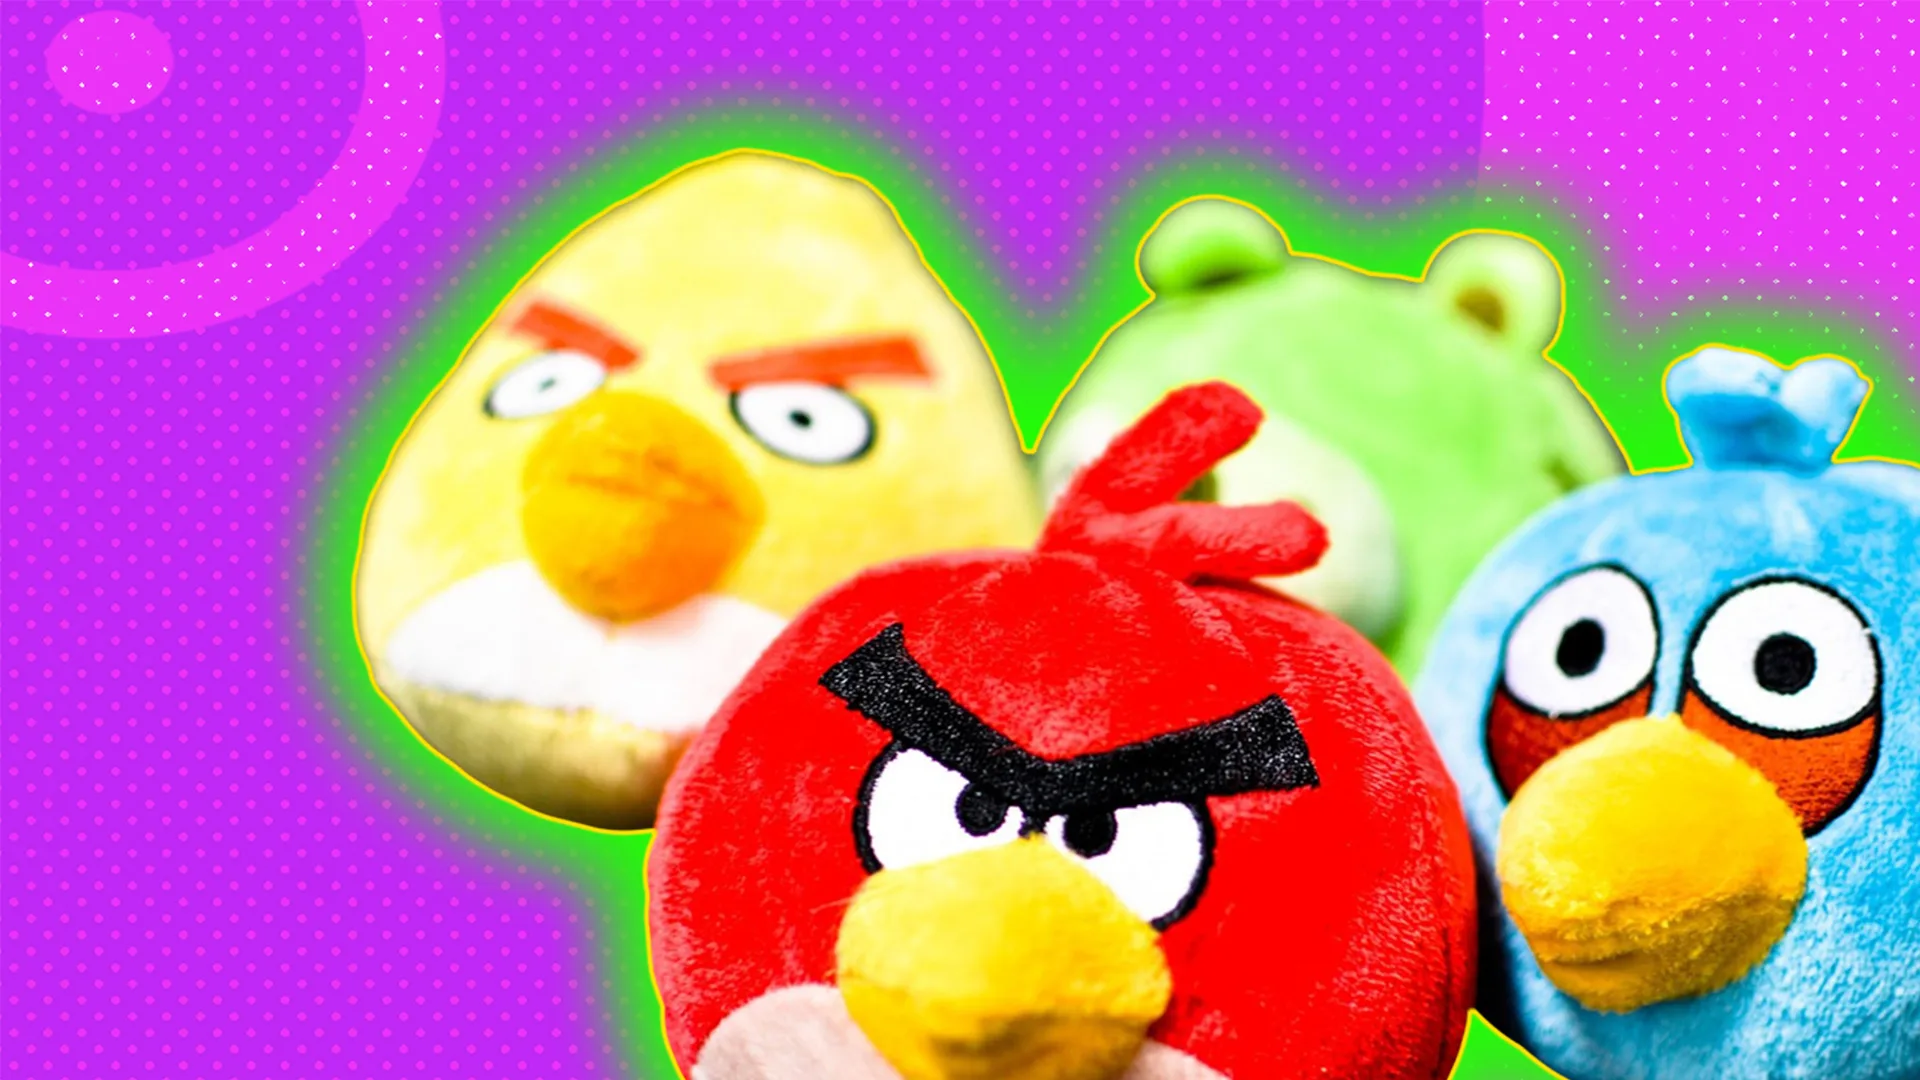 Angry Birds plush toys with a polkadot background and a glow around the image